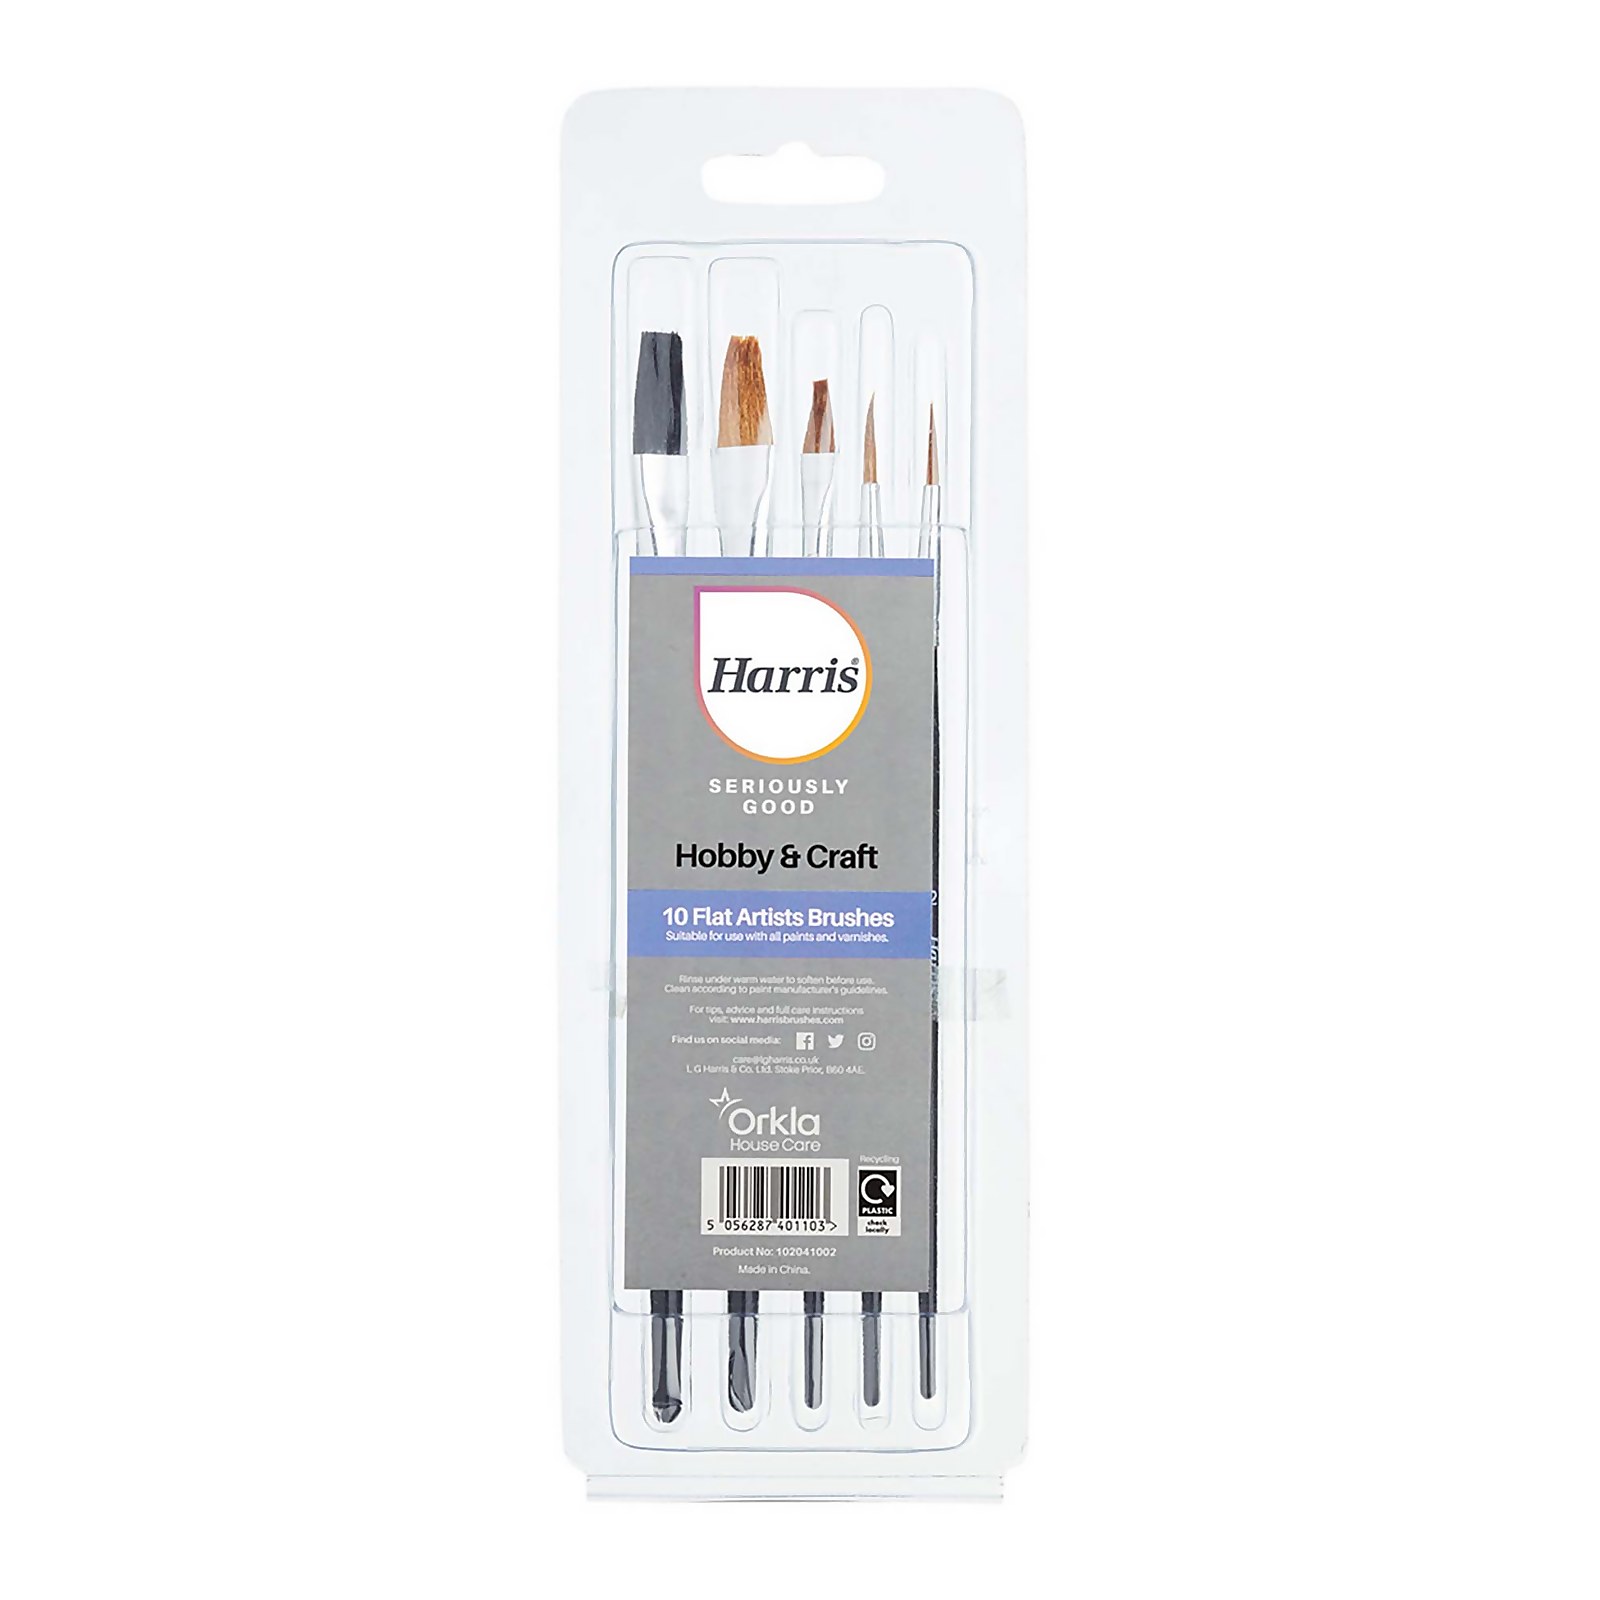 Photo of Harris Seriously Good Artist Paint Brushes 10 Pack